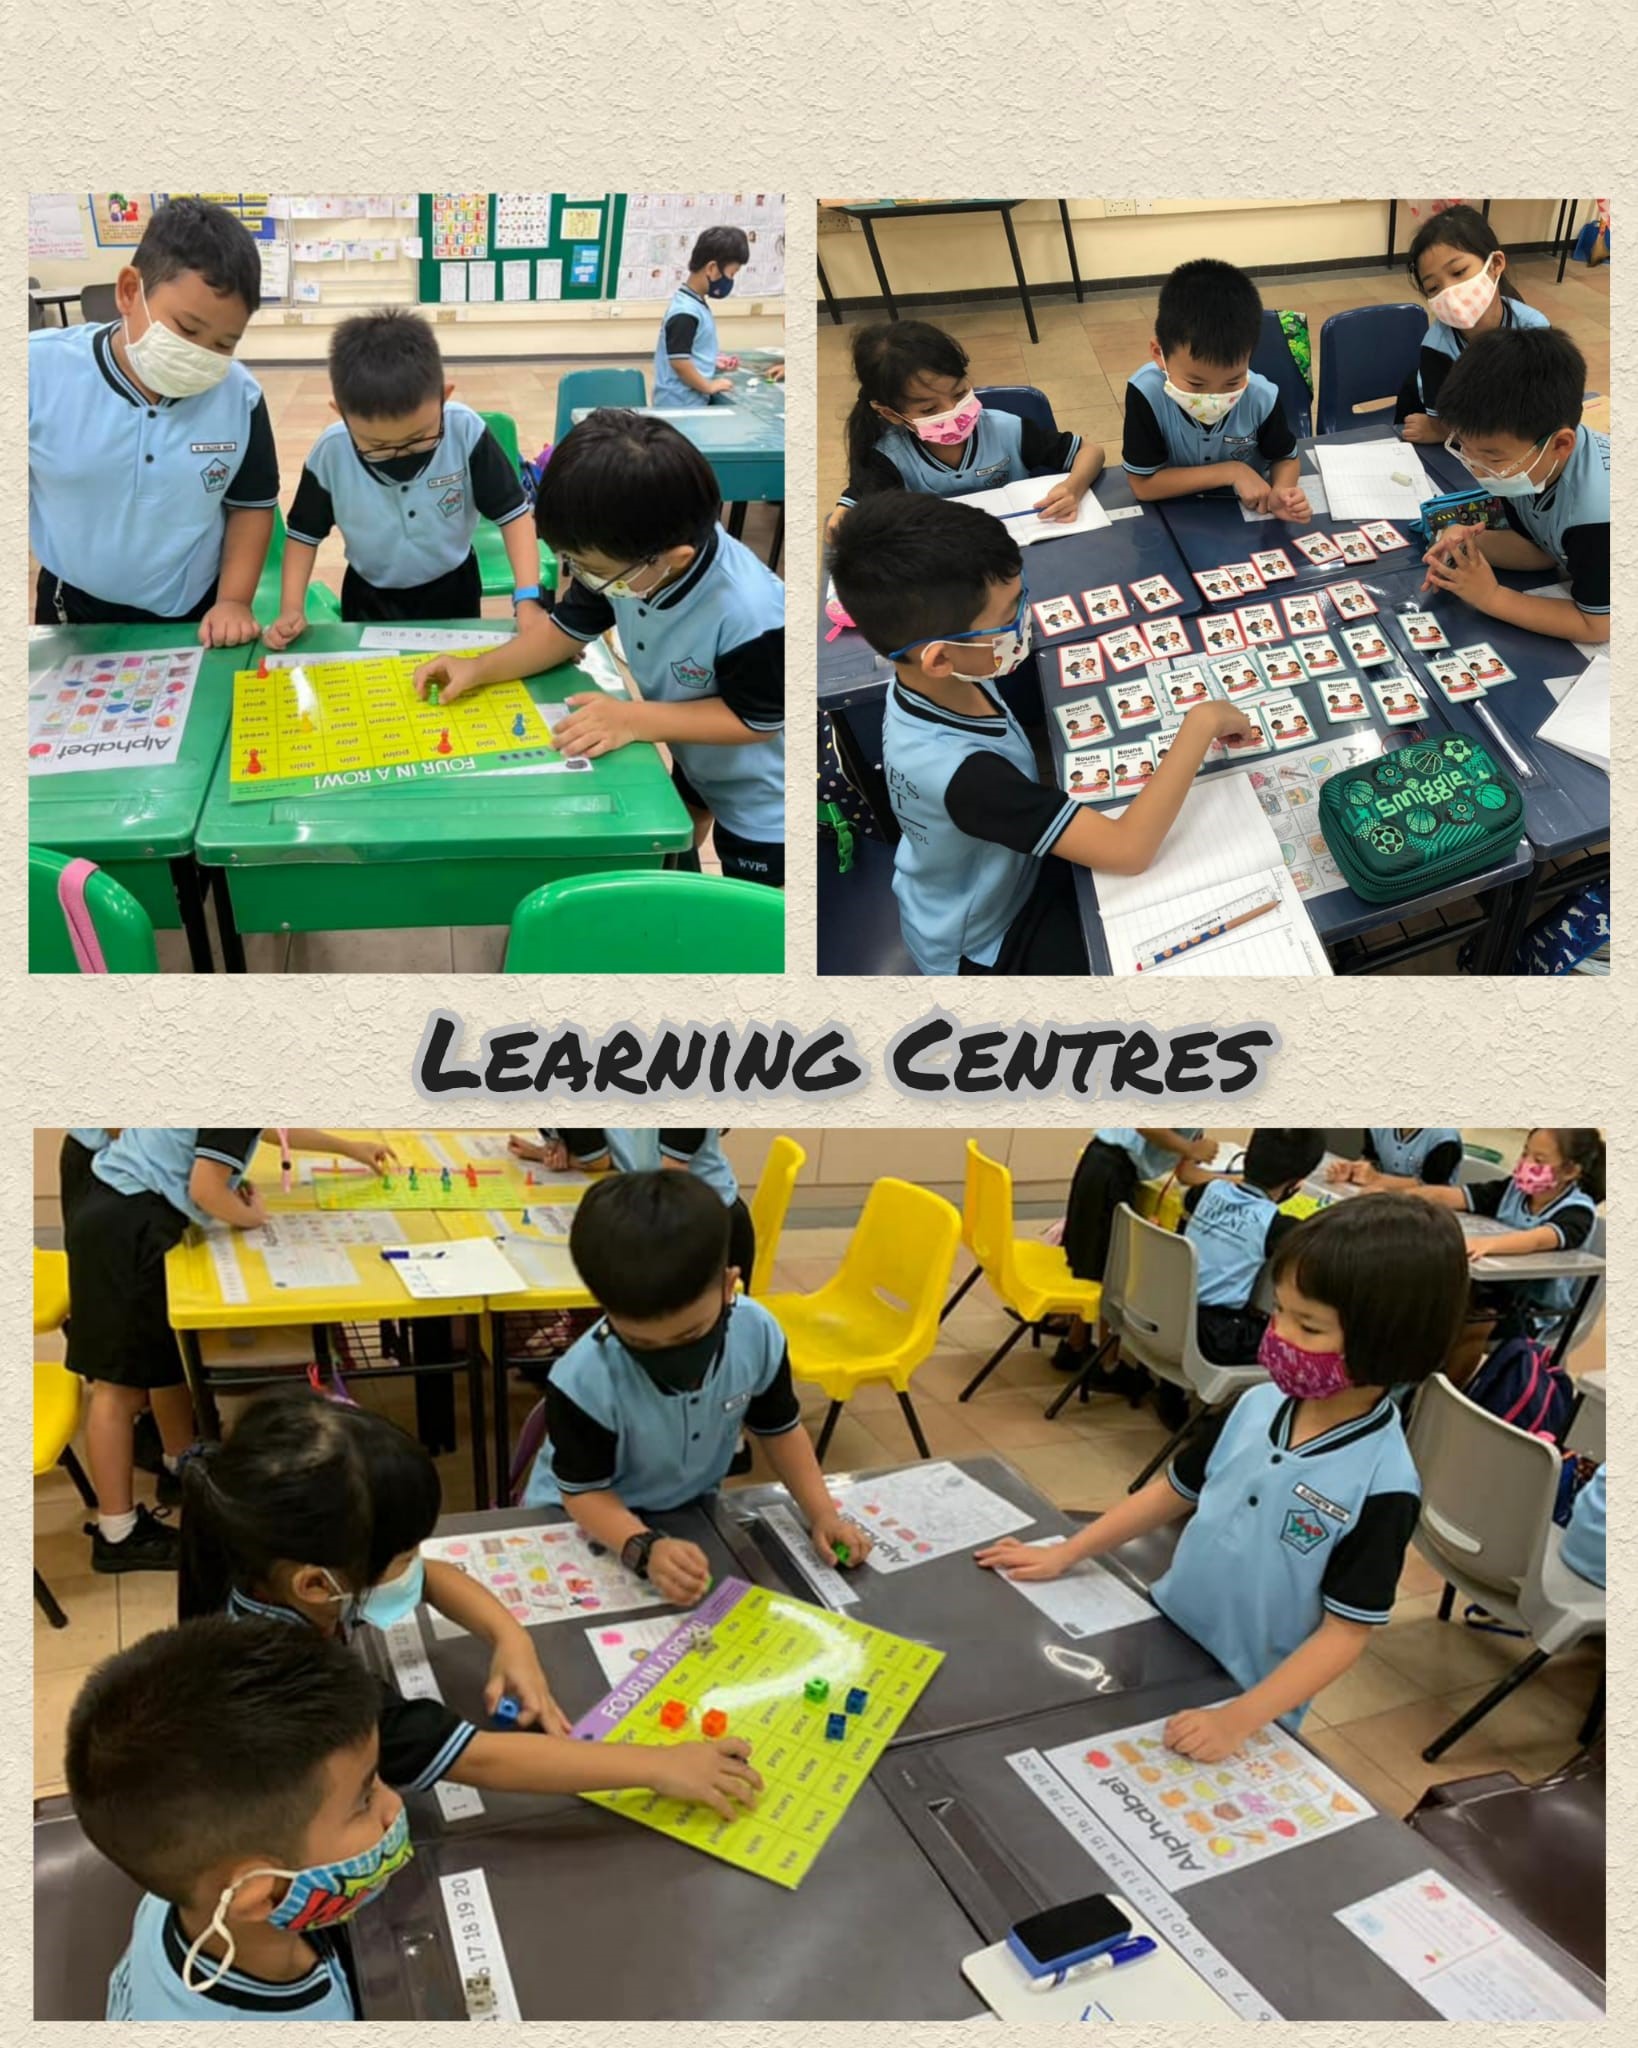 Pupils learning collaboratively through learning centre activities